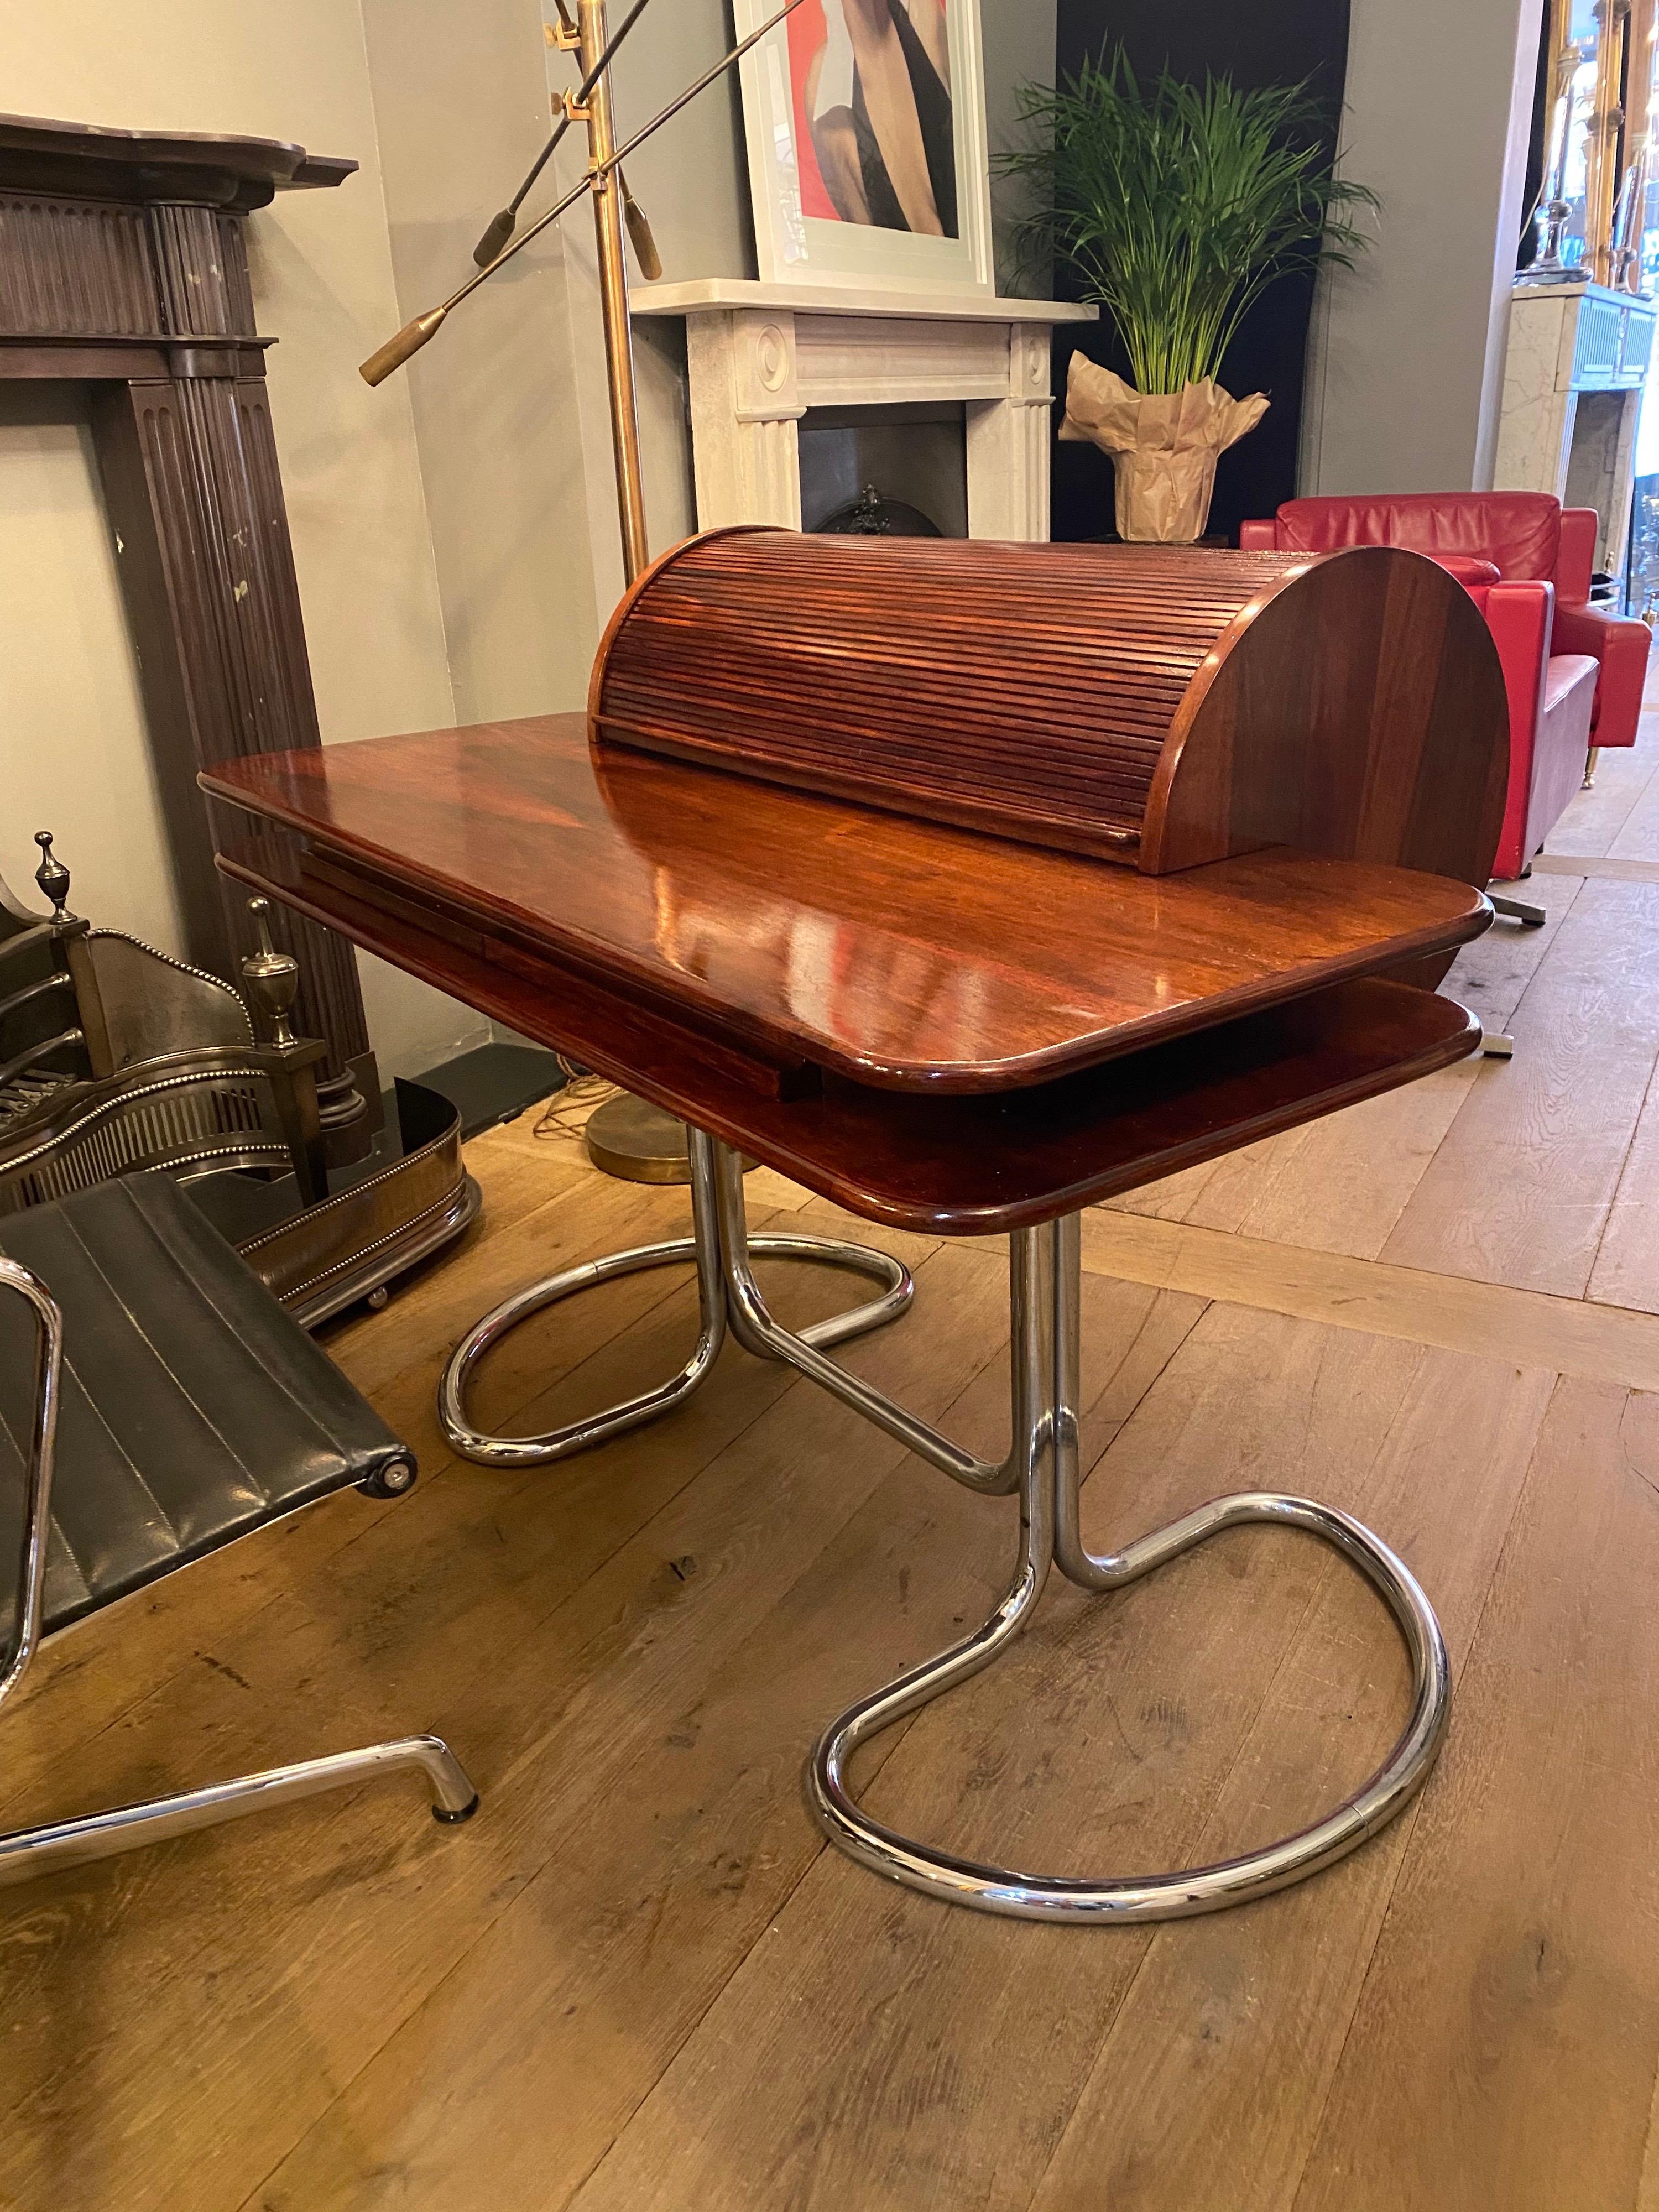 A superb example of this Iconic Italian desk manufactured by Bernini and designed by Giotto Stoppino.
Supported on tubular chromed legs, the rich wood top with rolling tambour, which reveals the original trays for stationary. Two discreet drawers